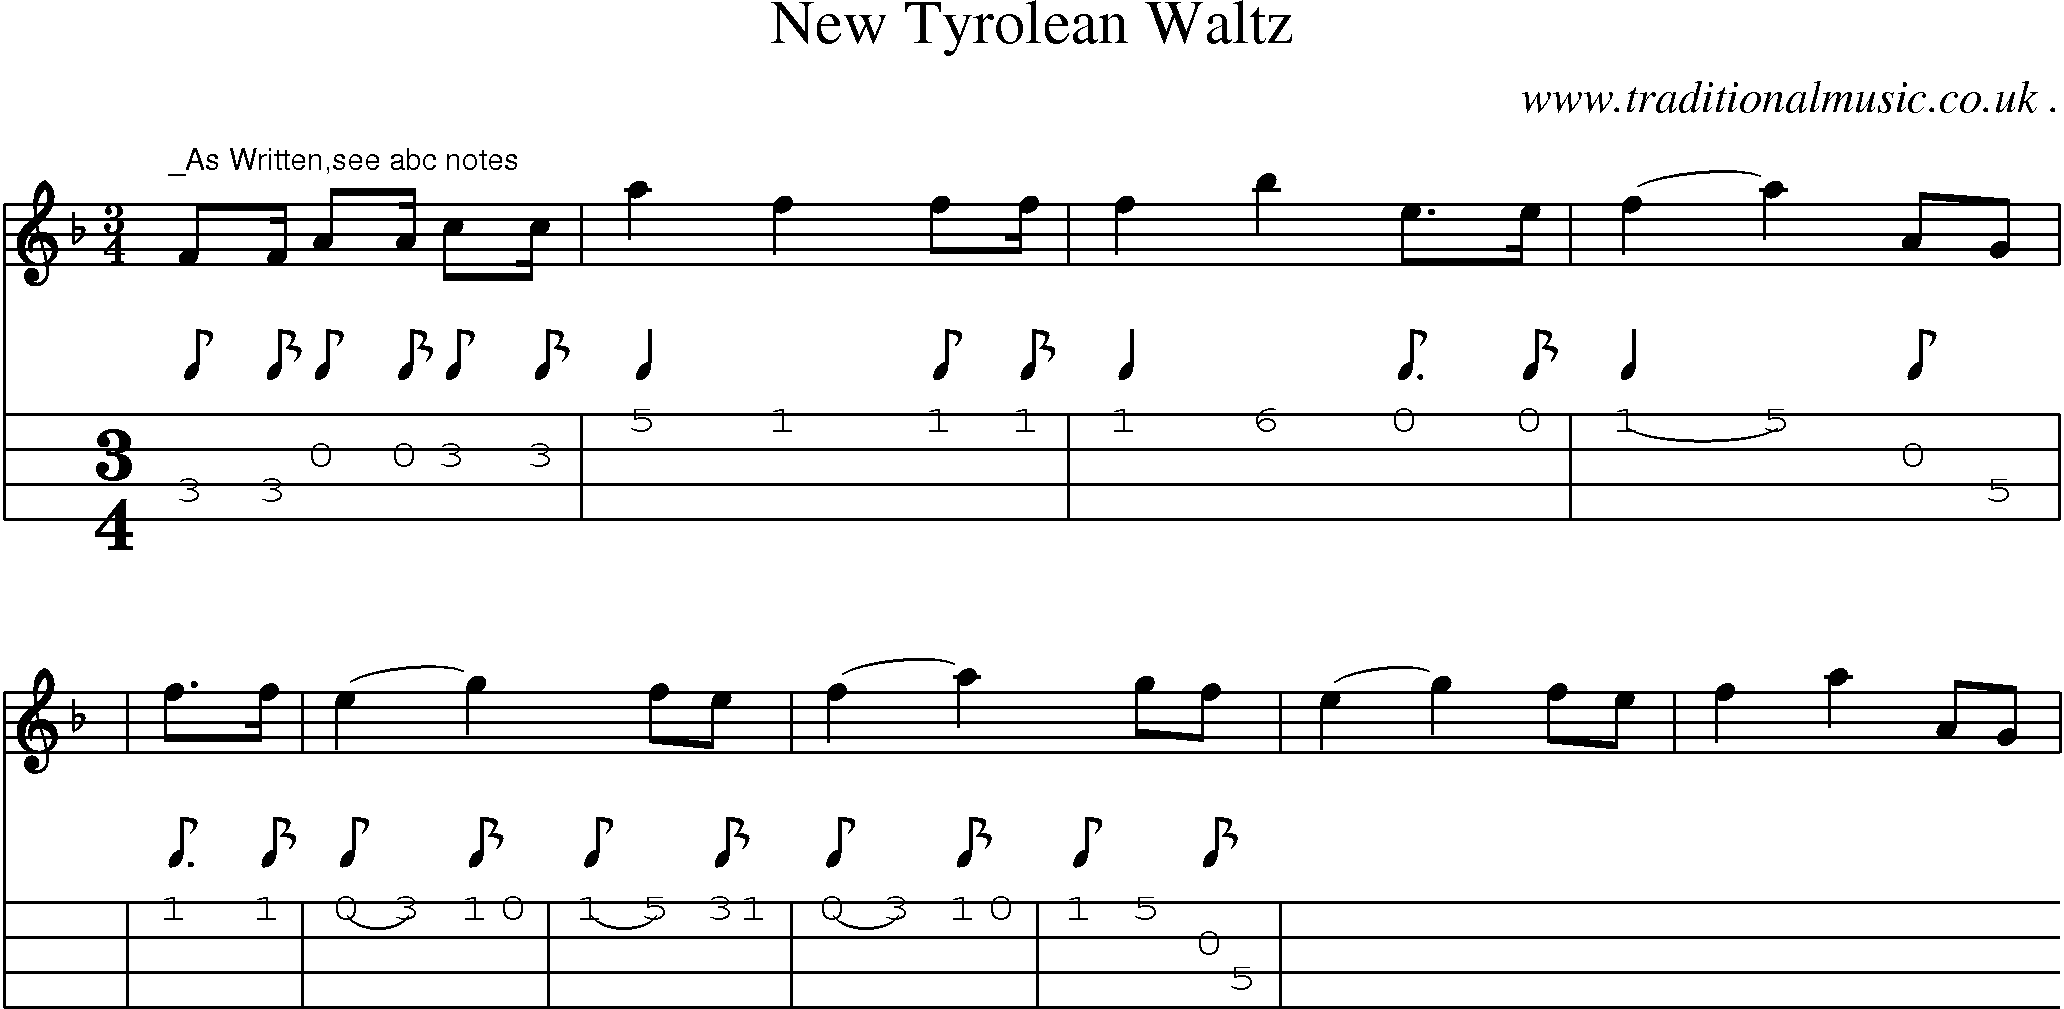 Sheet-Music and Mandolin Tabs for New Tyrolean Waltz